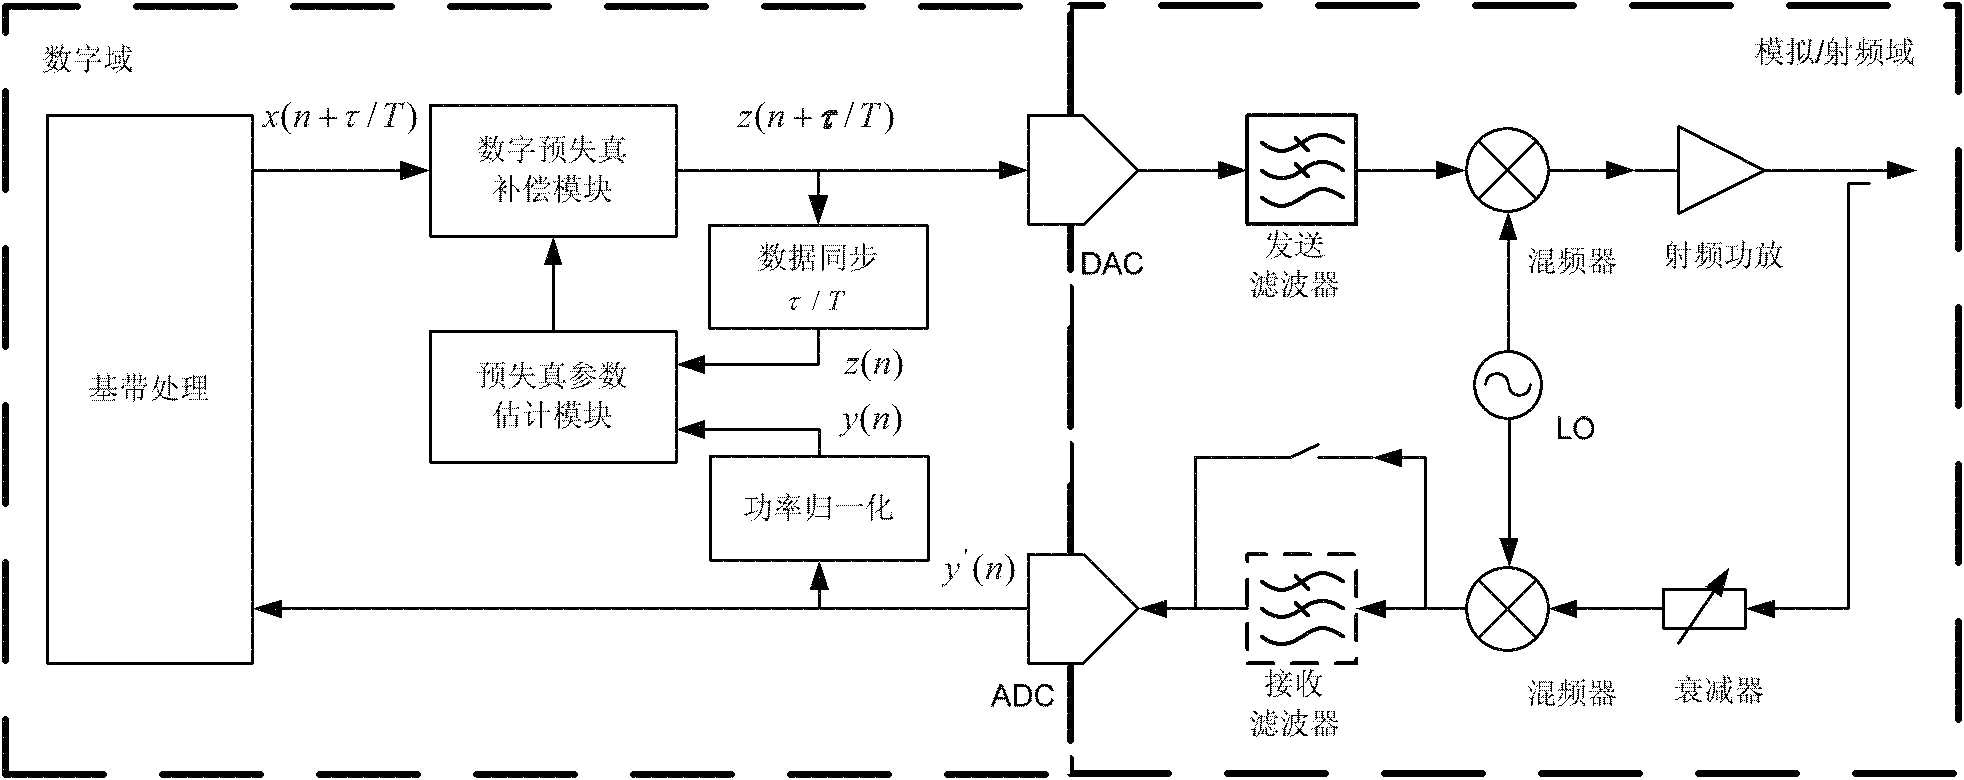 Self-adaptive digital pre-distortion linear system of radio frequency power amplifier